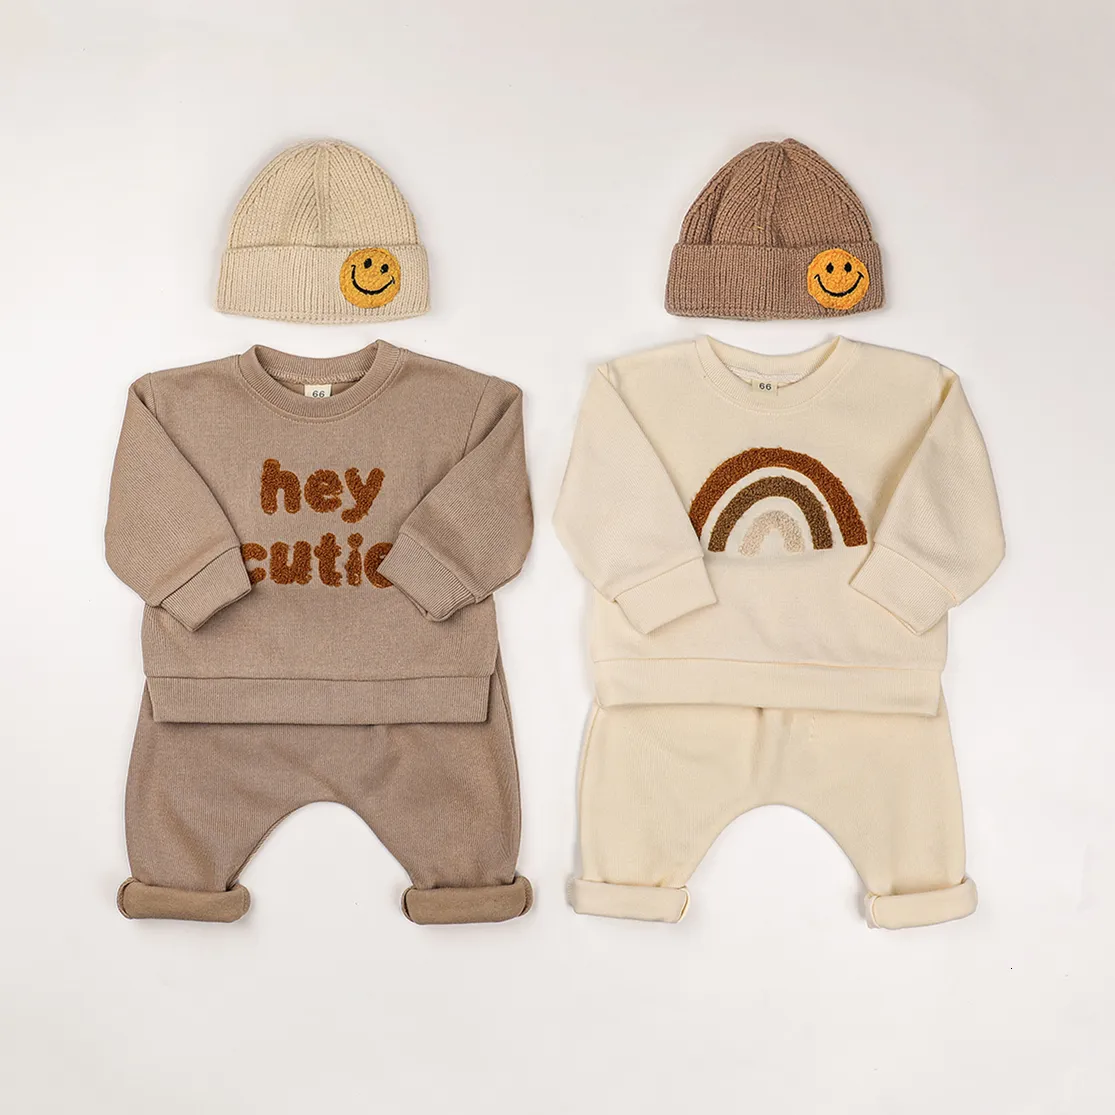 Clothing Sets Europe Baby Cotton Kintting Clothing Sets Kids Boys Girls Spring Clothes Loose Tracksuit Pullovers TopsPants 2PCS Outfits 230217